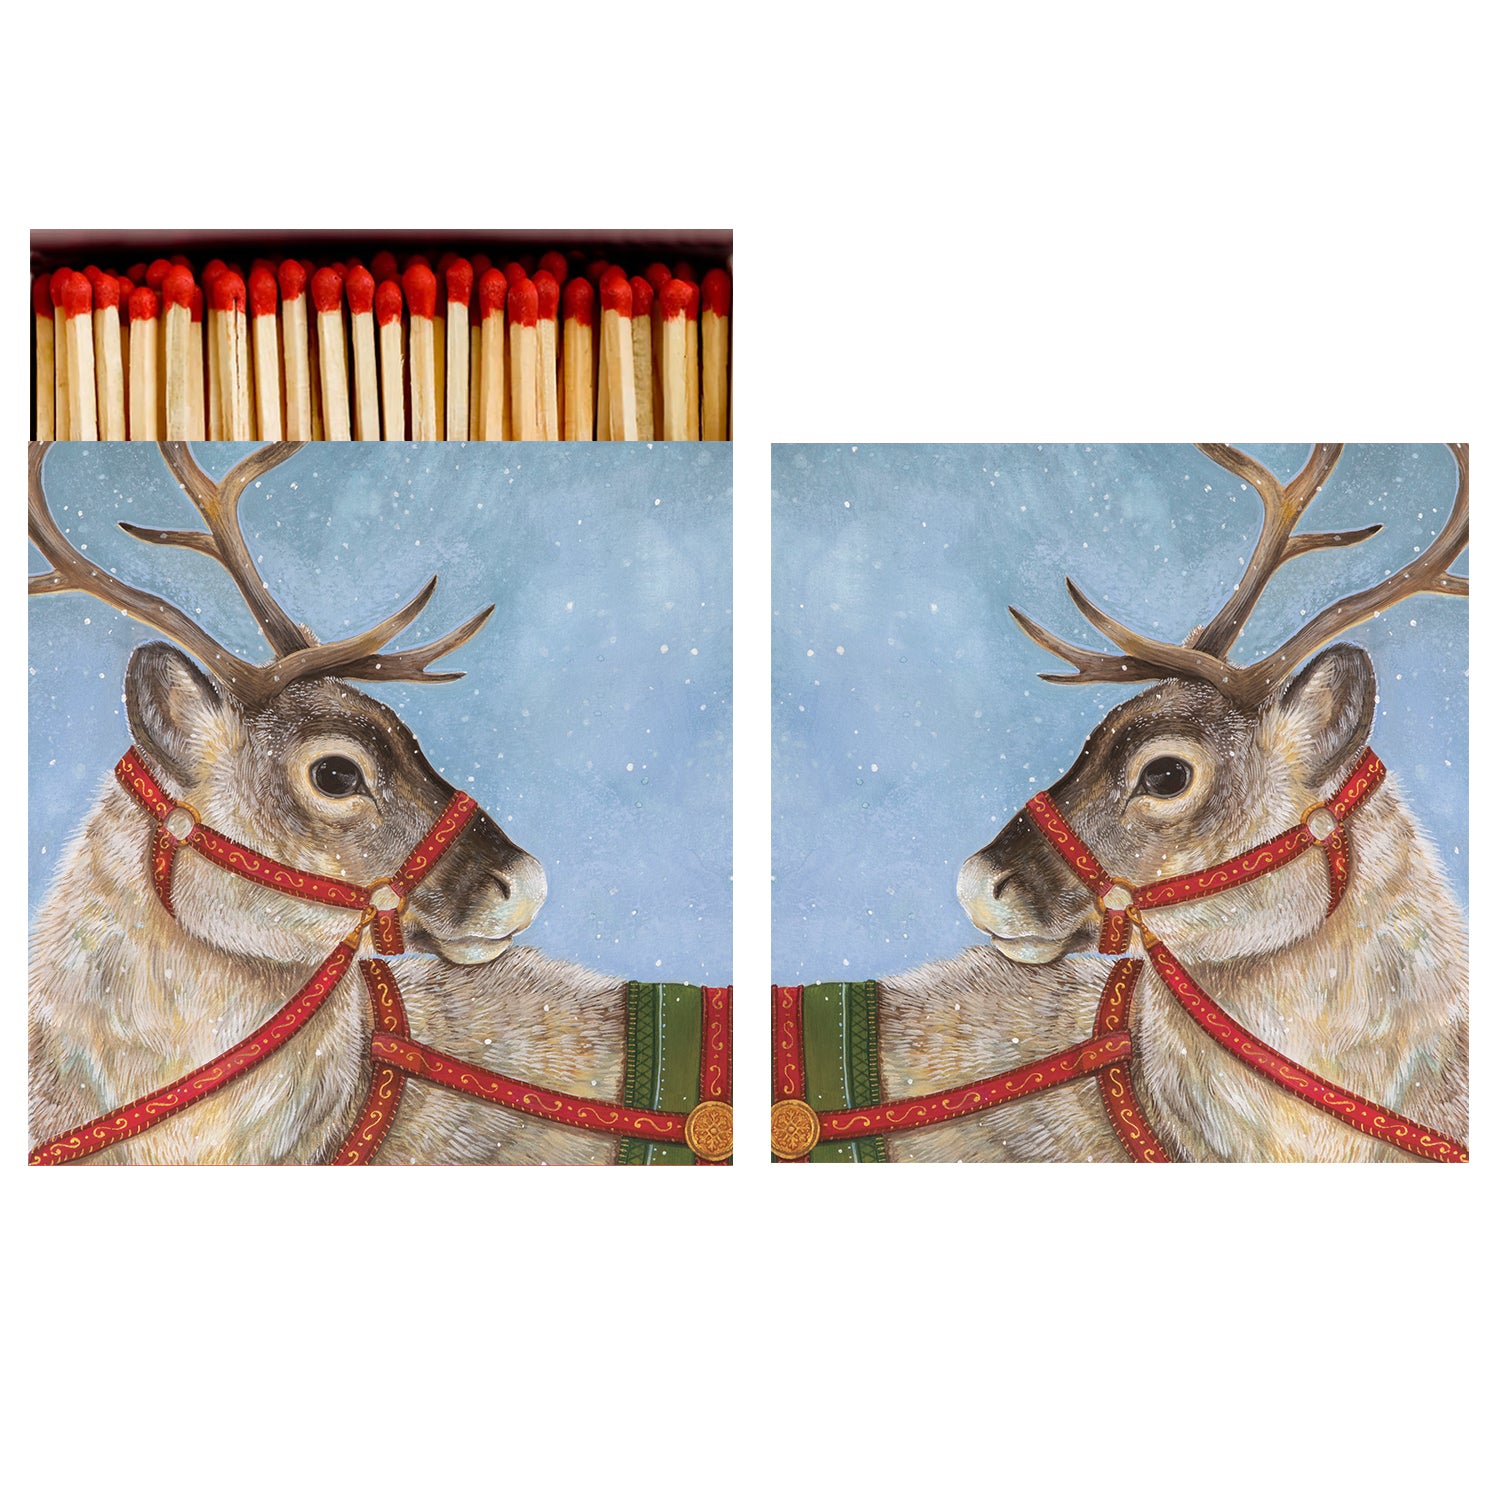 These adorable Dashing Reindeer Matches by Hester &amp; Cook are the perfect stocking stuffer or hostess gift. Each matchbox features a charming reindeer design, making them a festive addition to any holiday gathering.